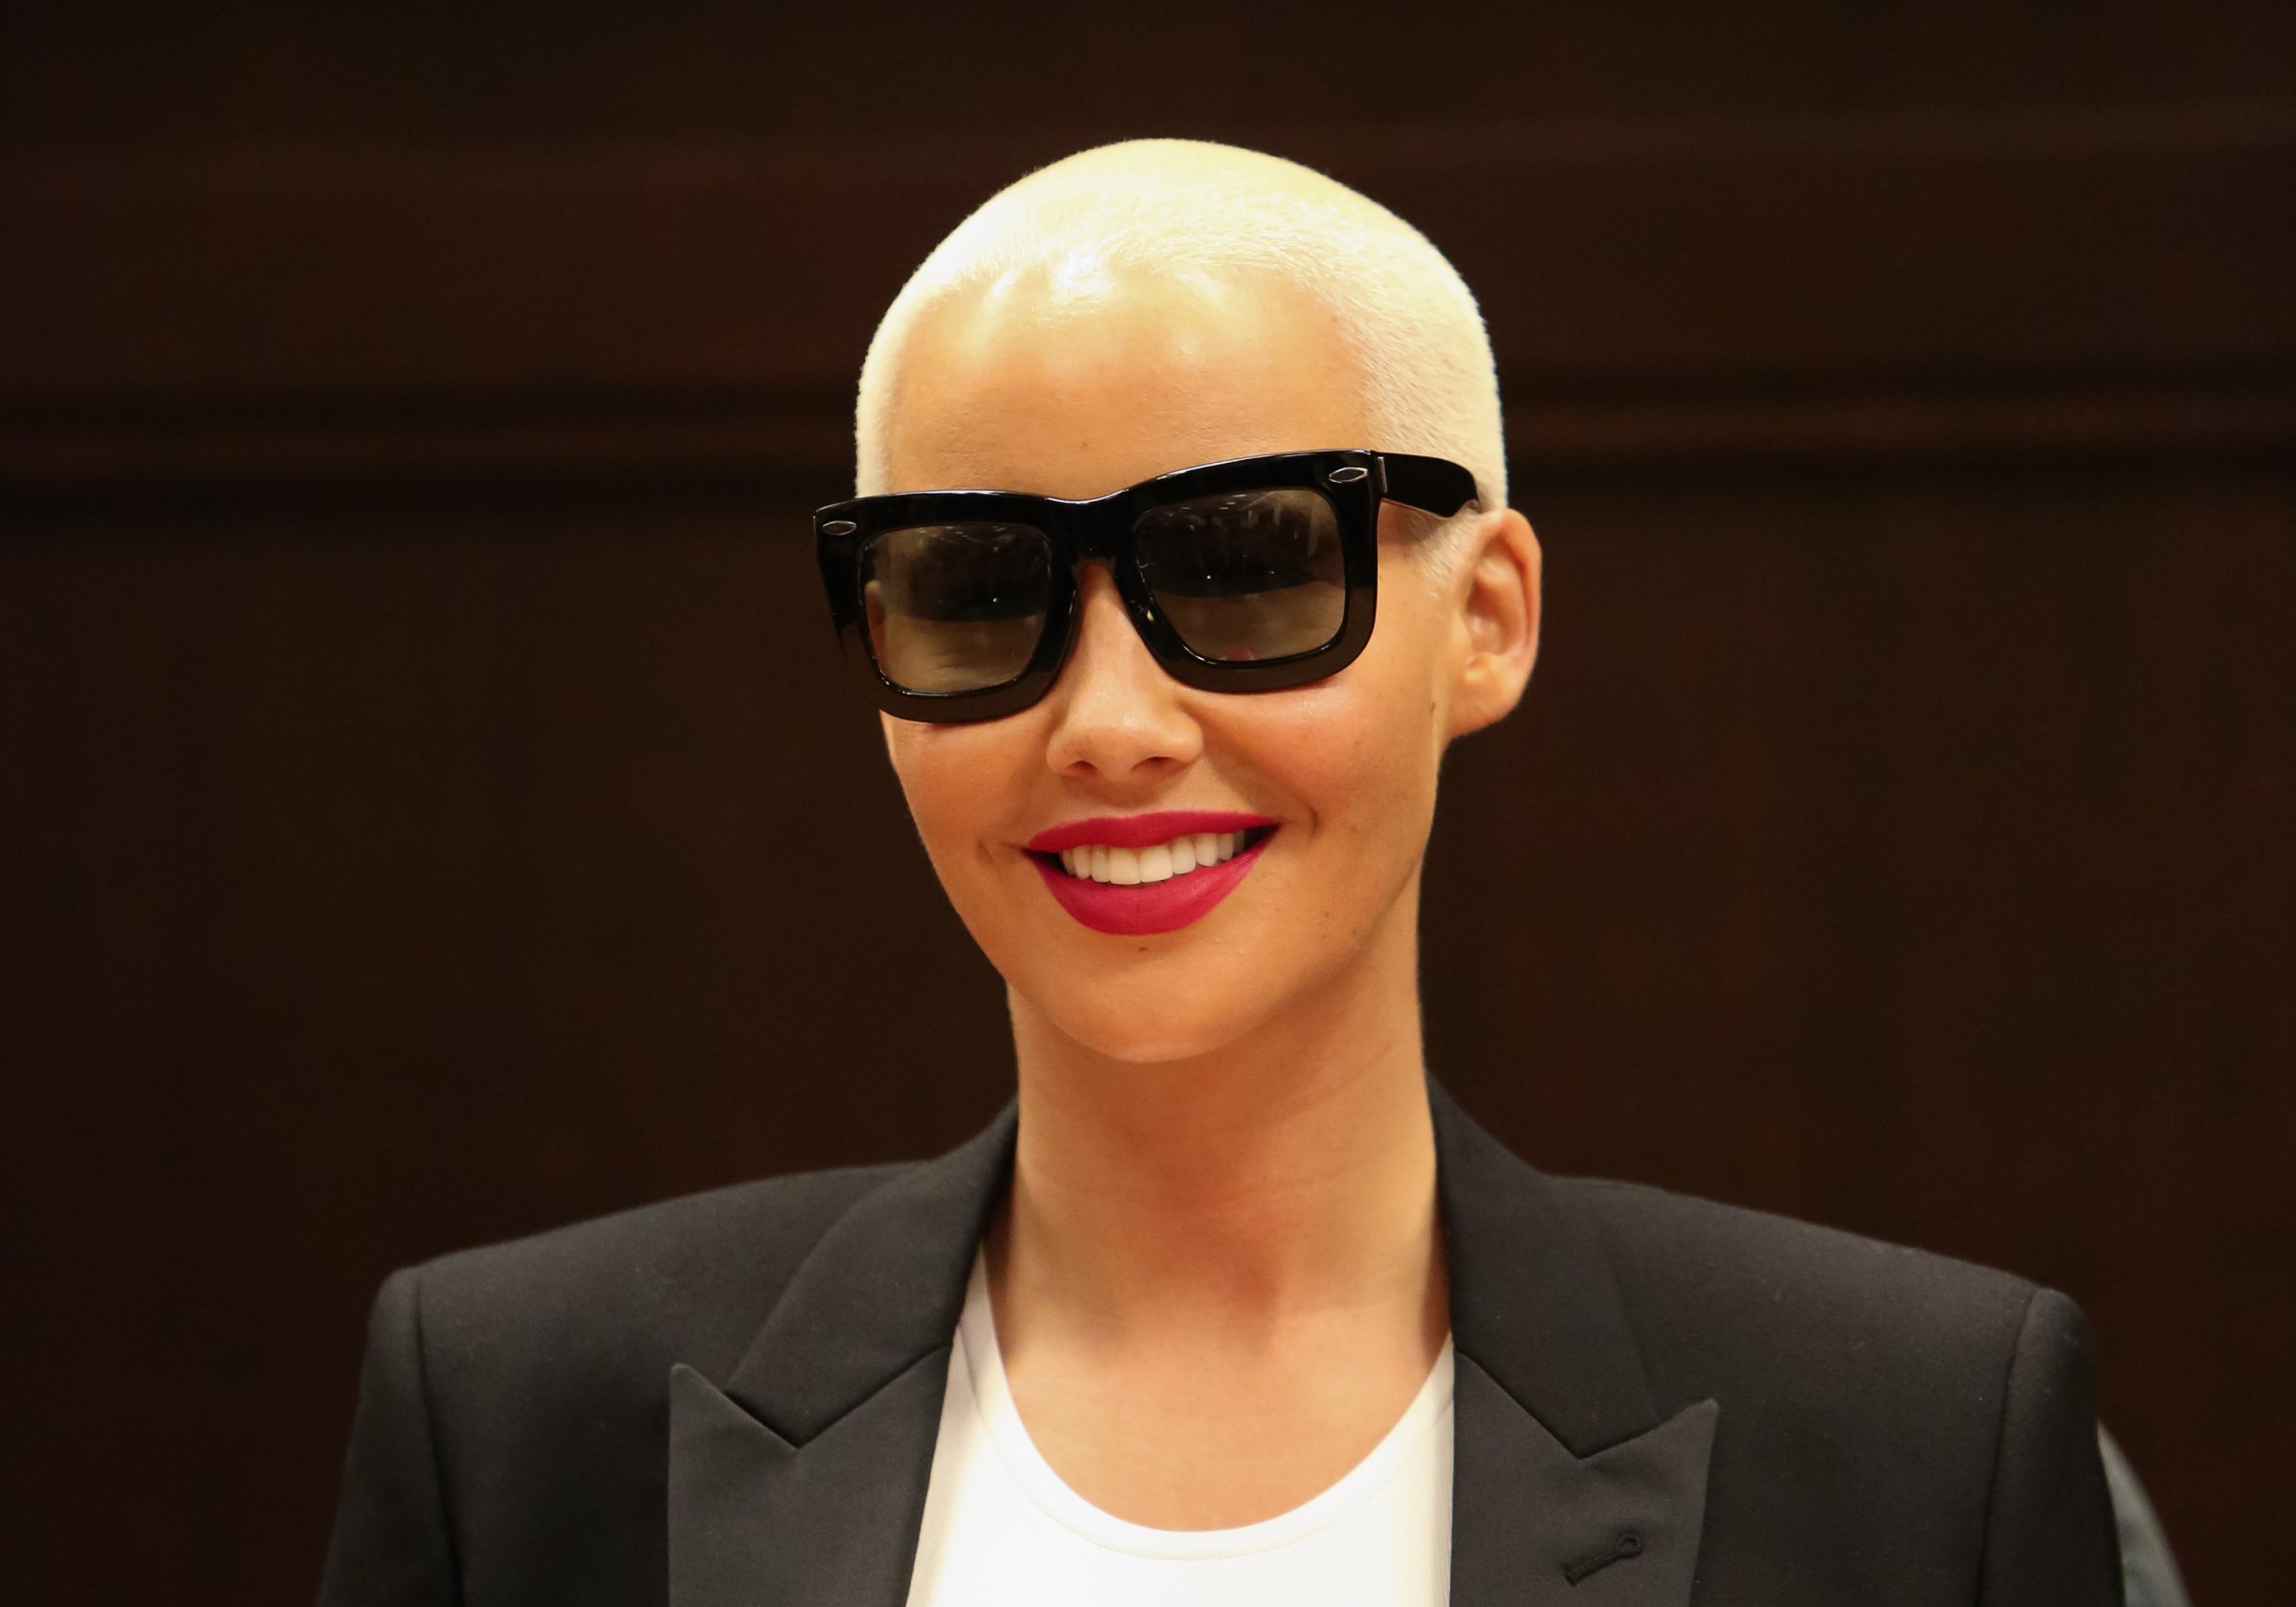 Amber Rose at the signing event of her book "How To Be A Bad Bitch" in Los Angeles on Oct. 29, 2015.